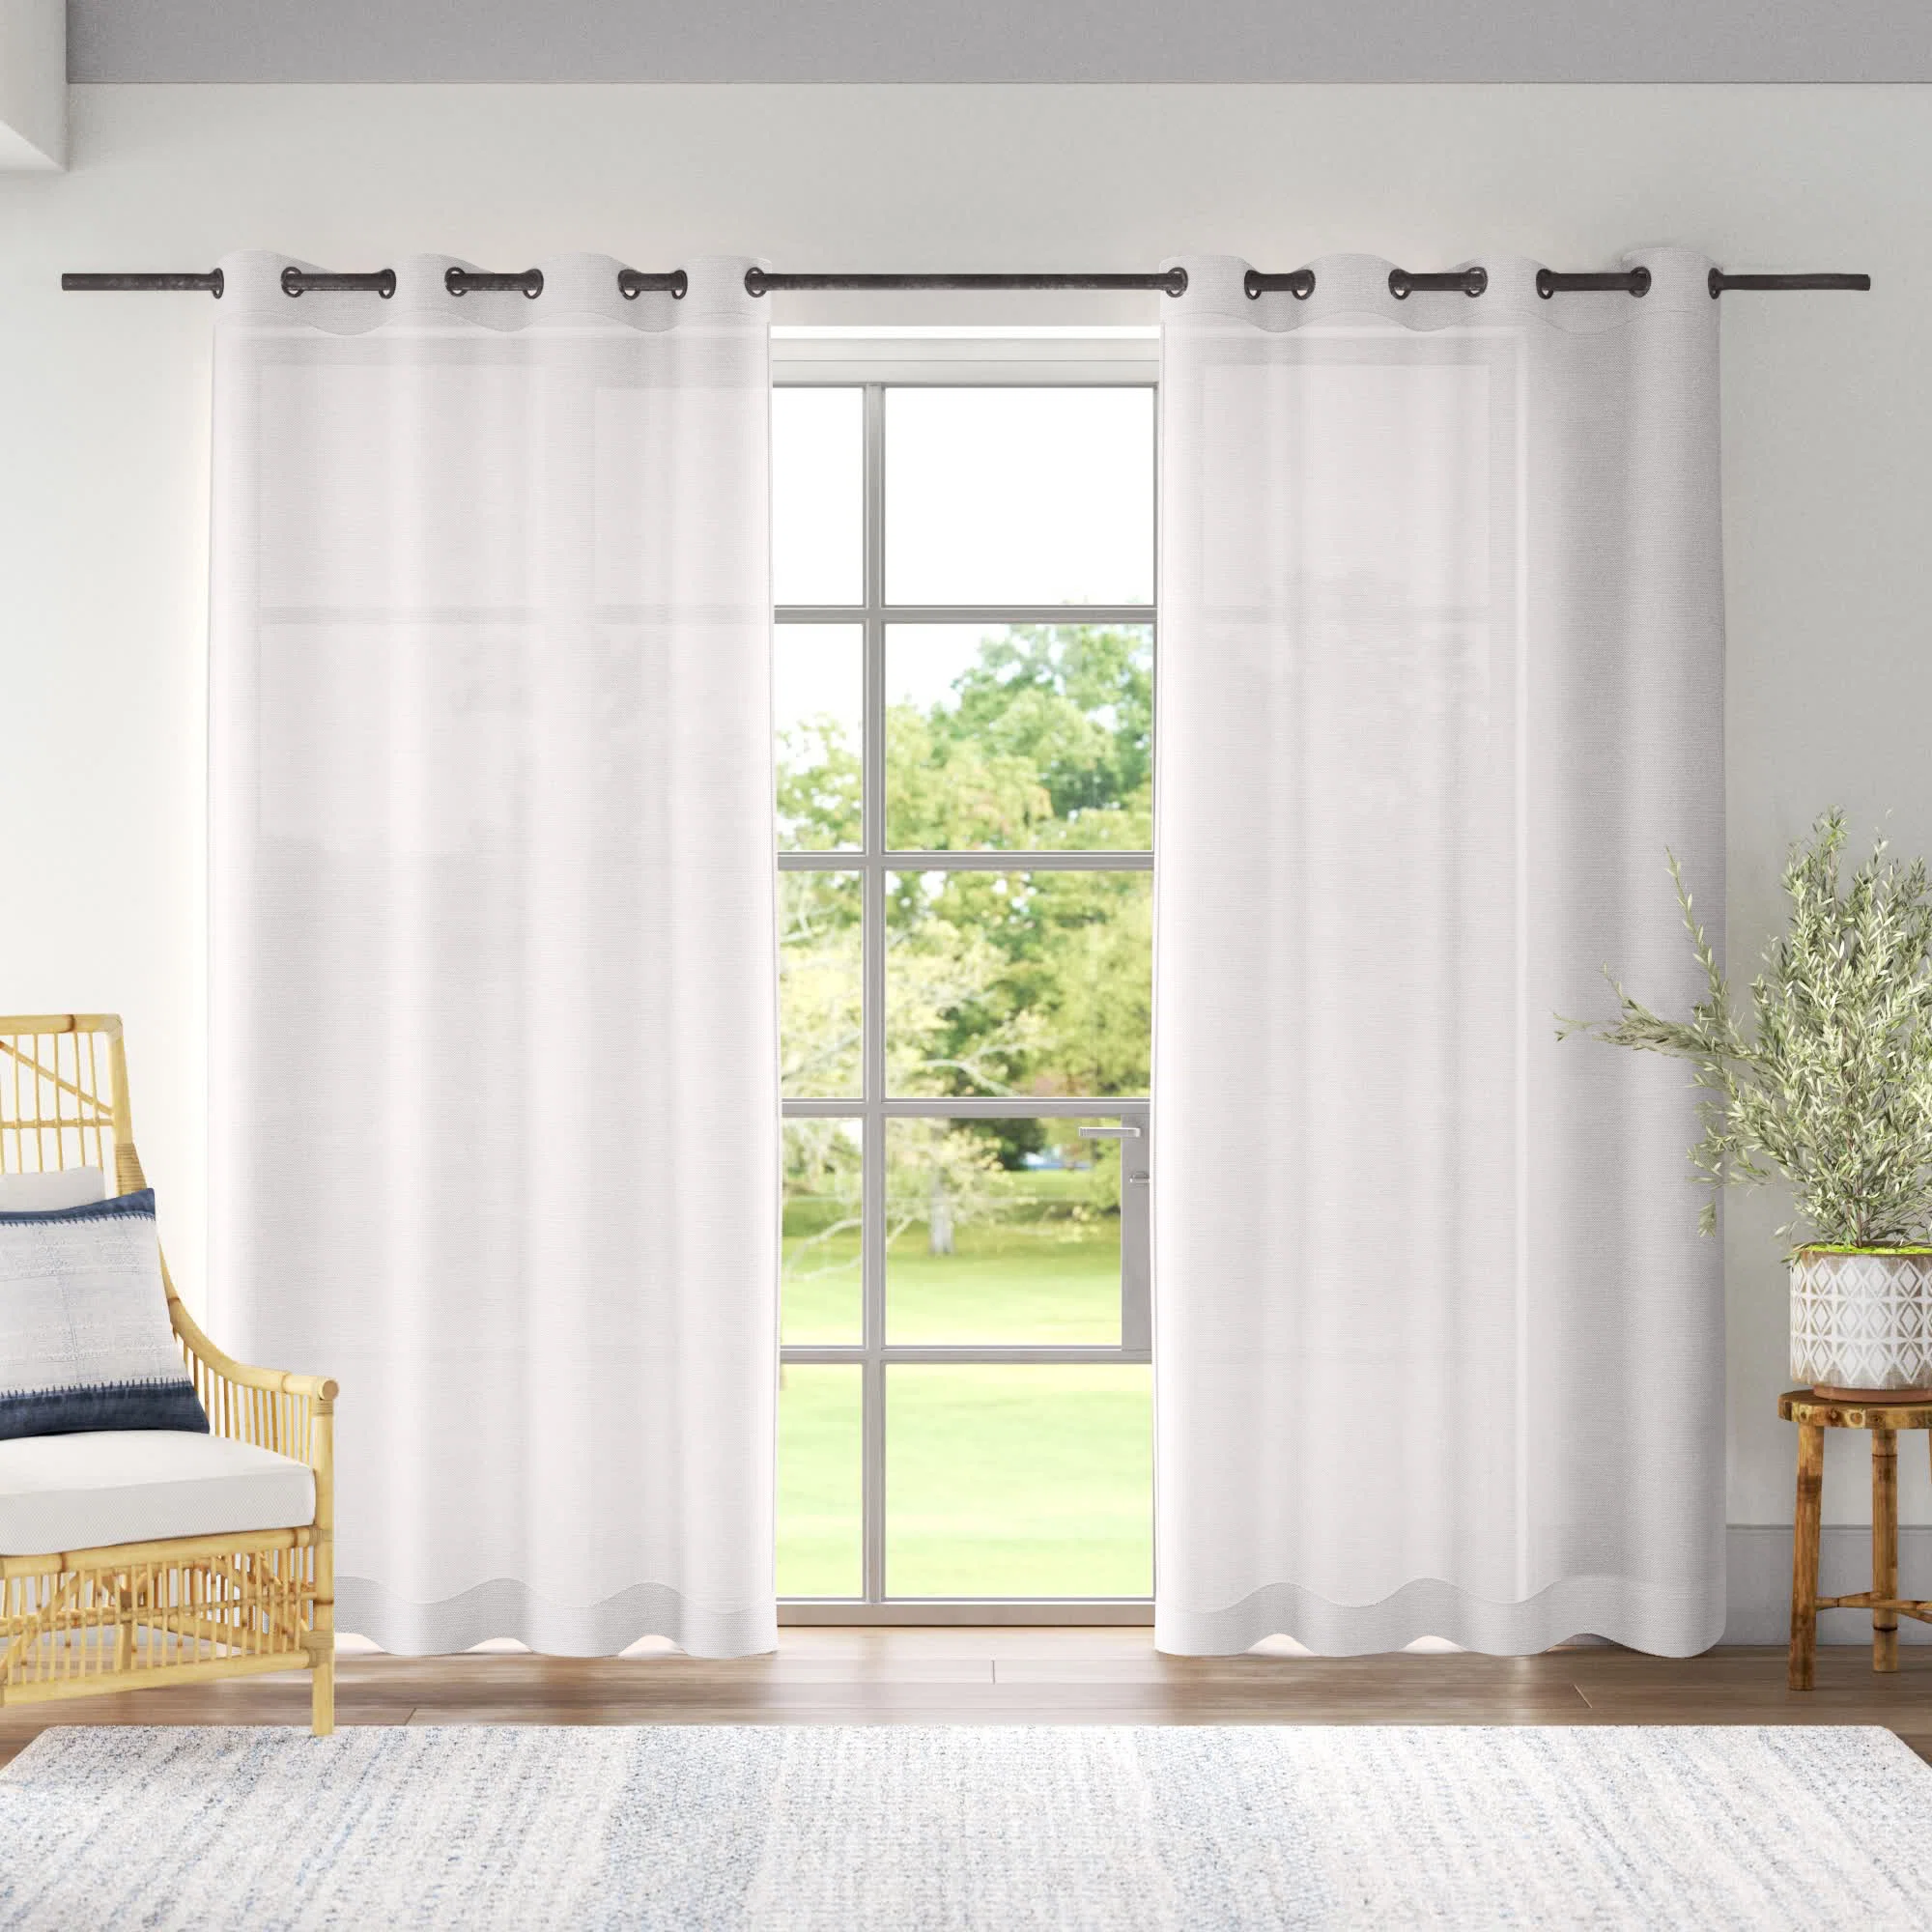 How To Clean Curtains at Home